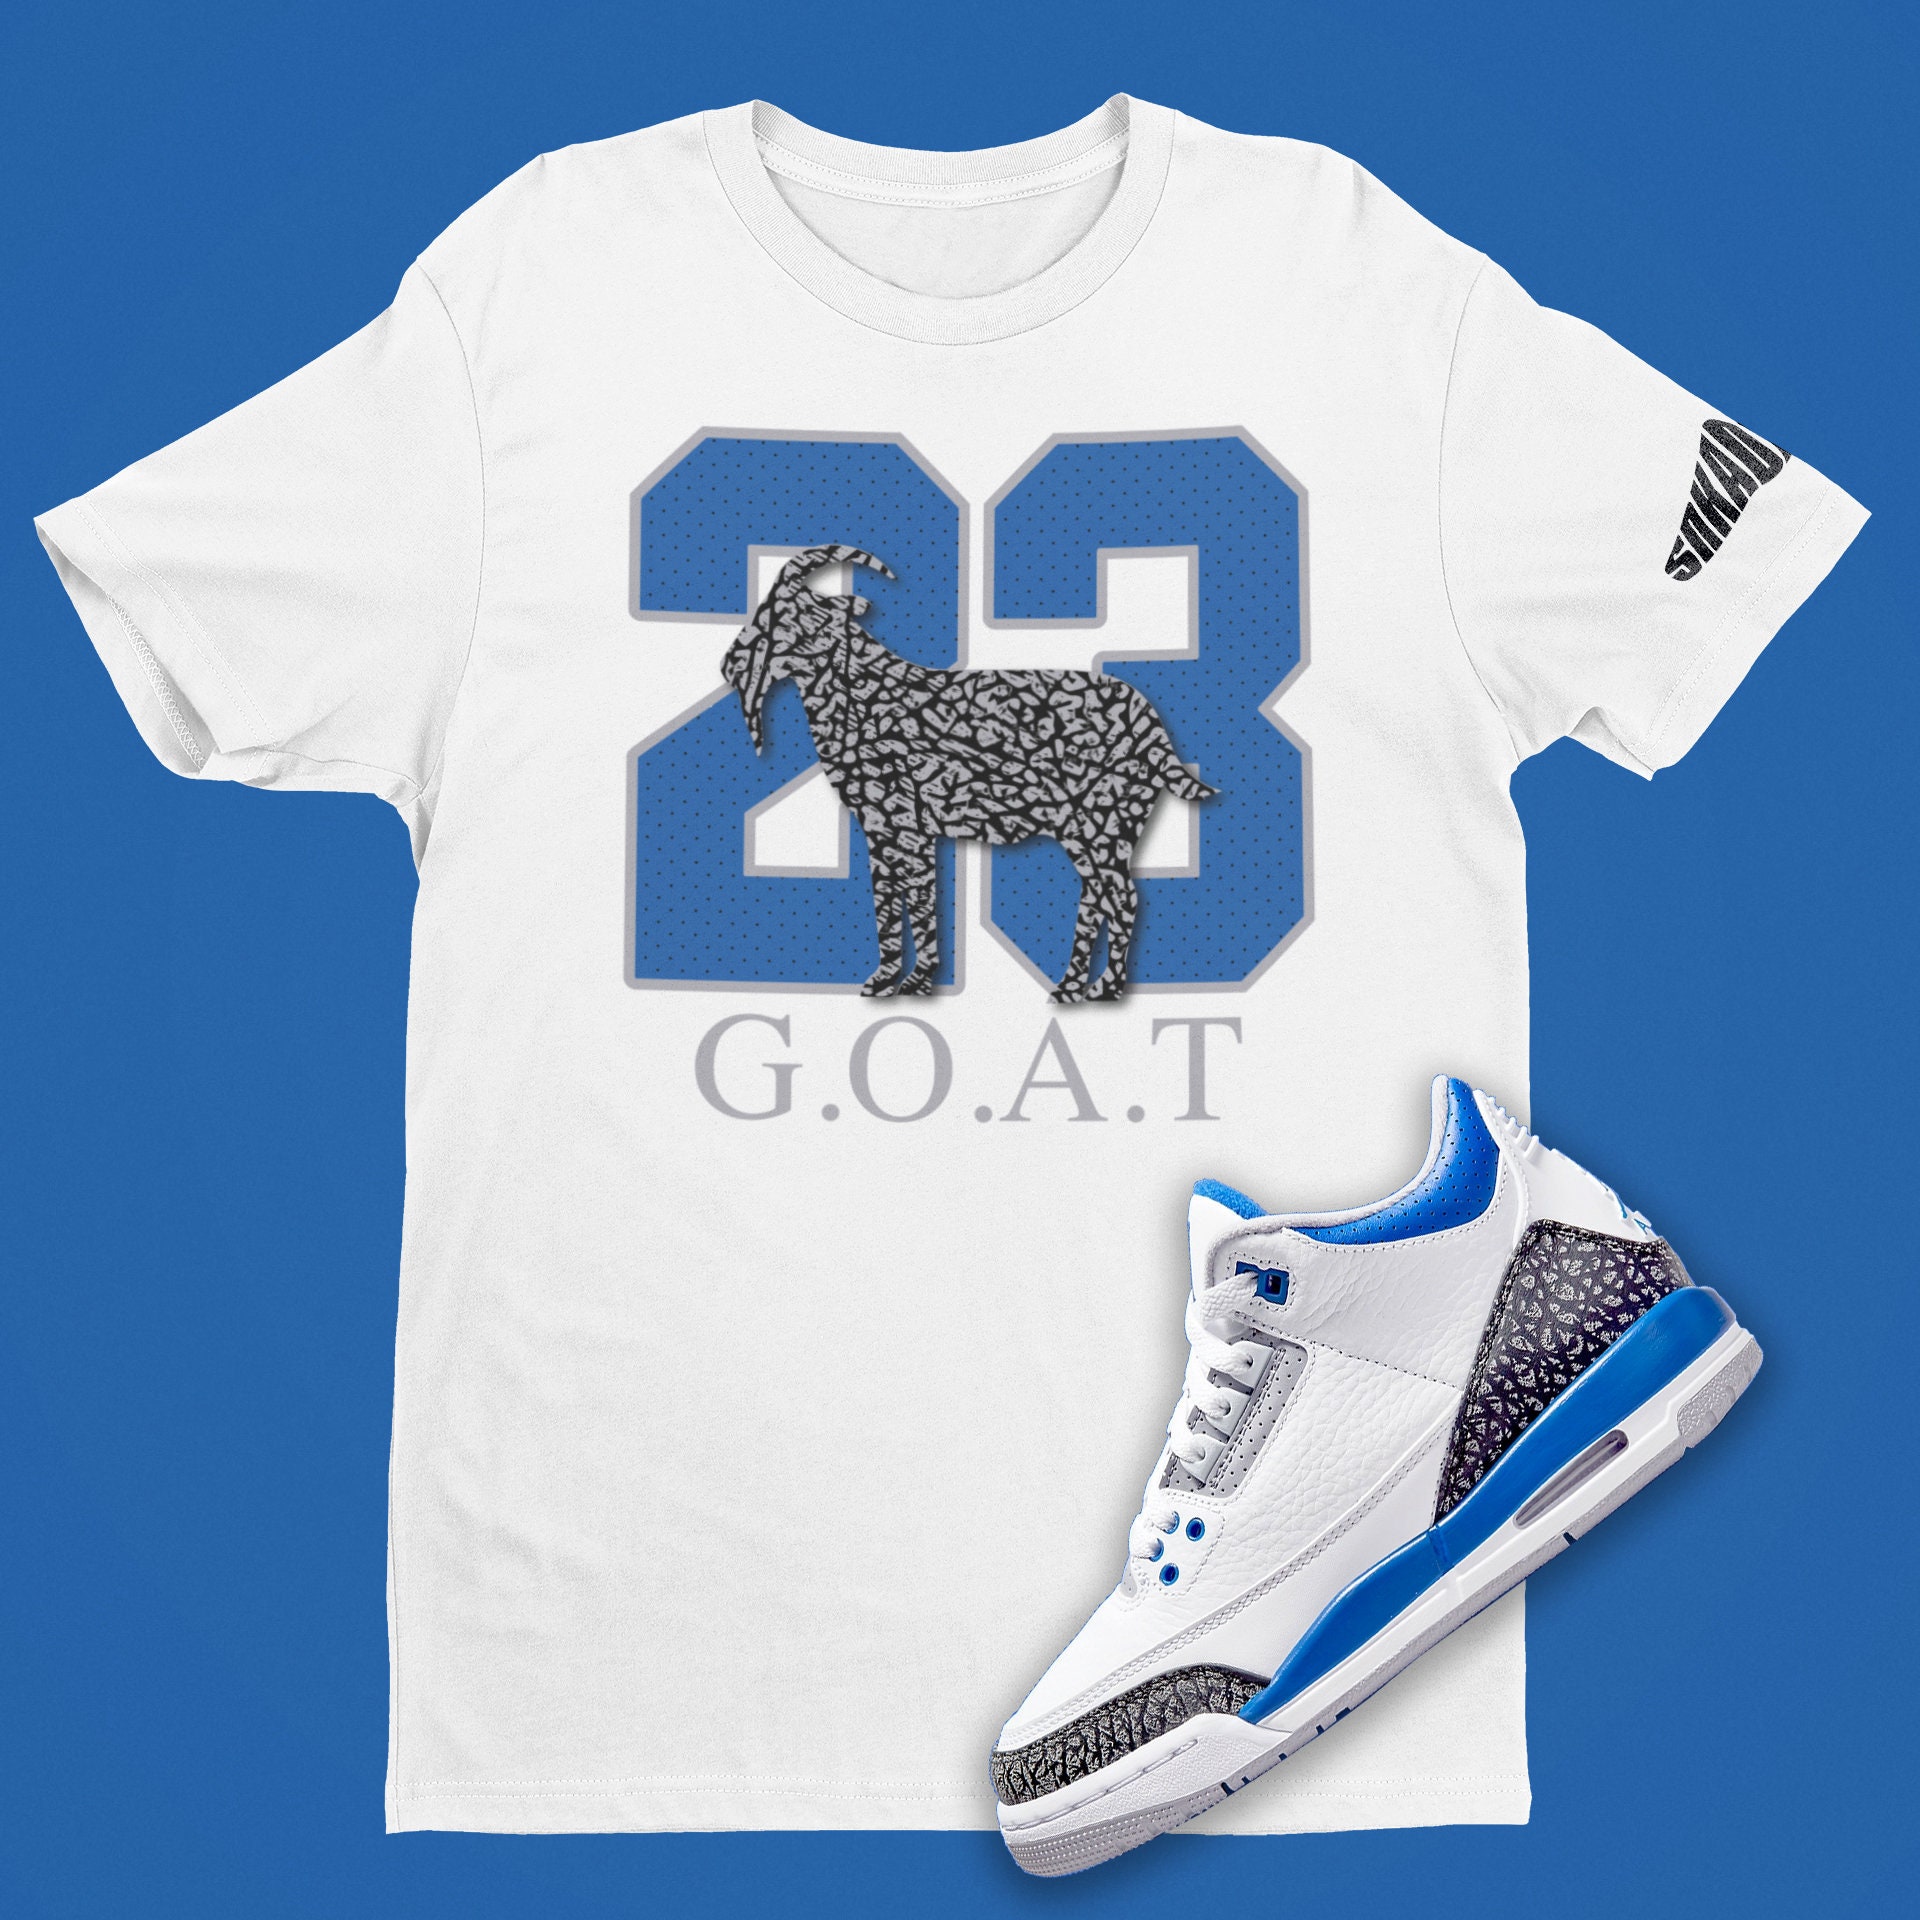 Jordan Goat Year 2023 Shirt - Bring Your Ideas, Thoughts And